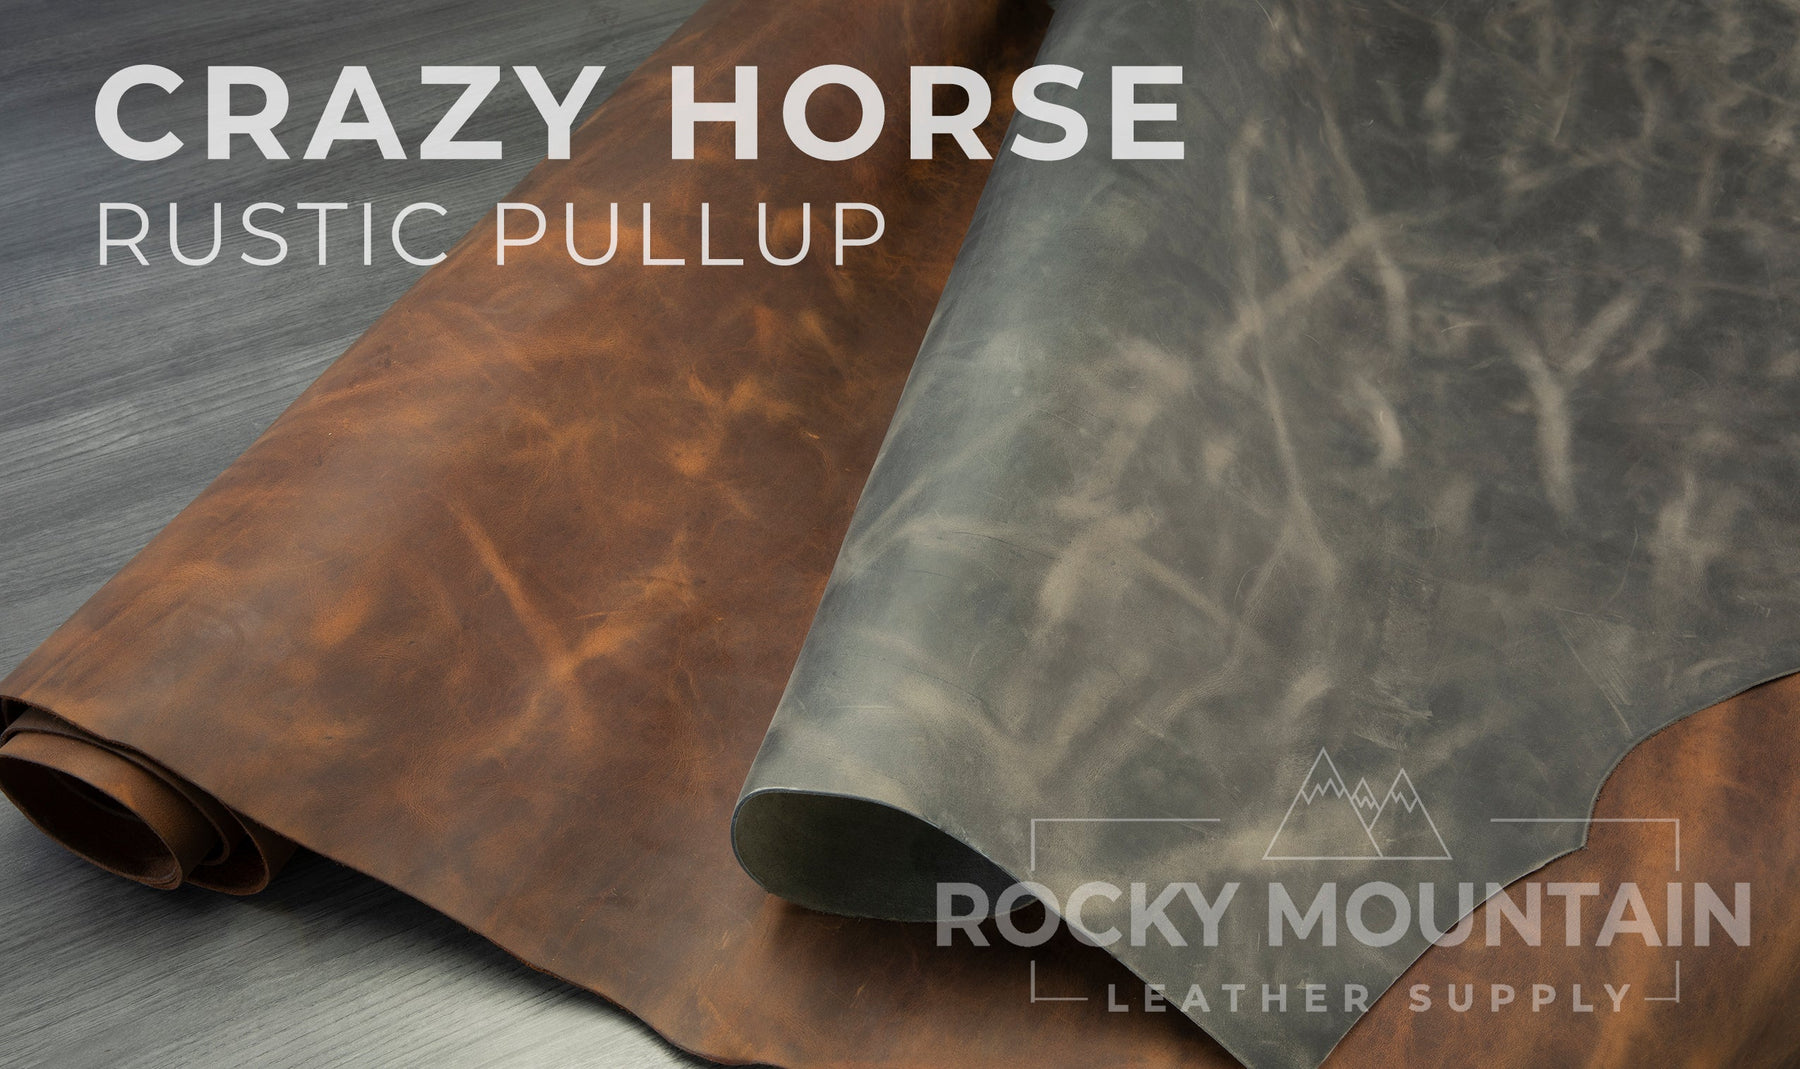 Seidel 🇺🇸 - Crazy Horse - Rustic Pull up Leather - Made in USA (SAMPLES)